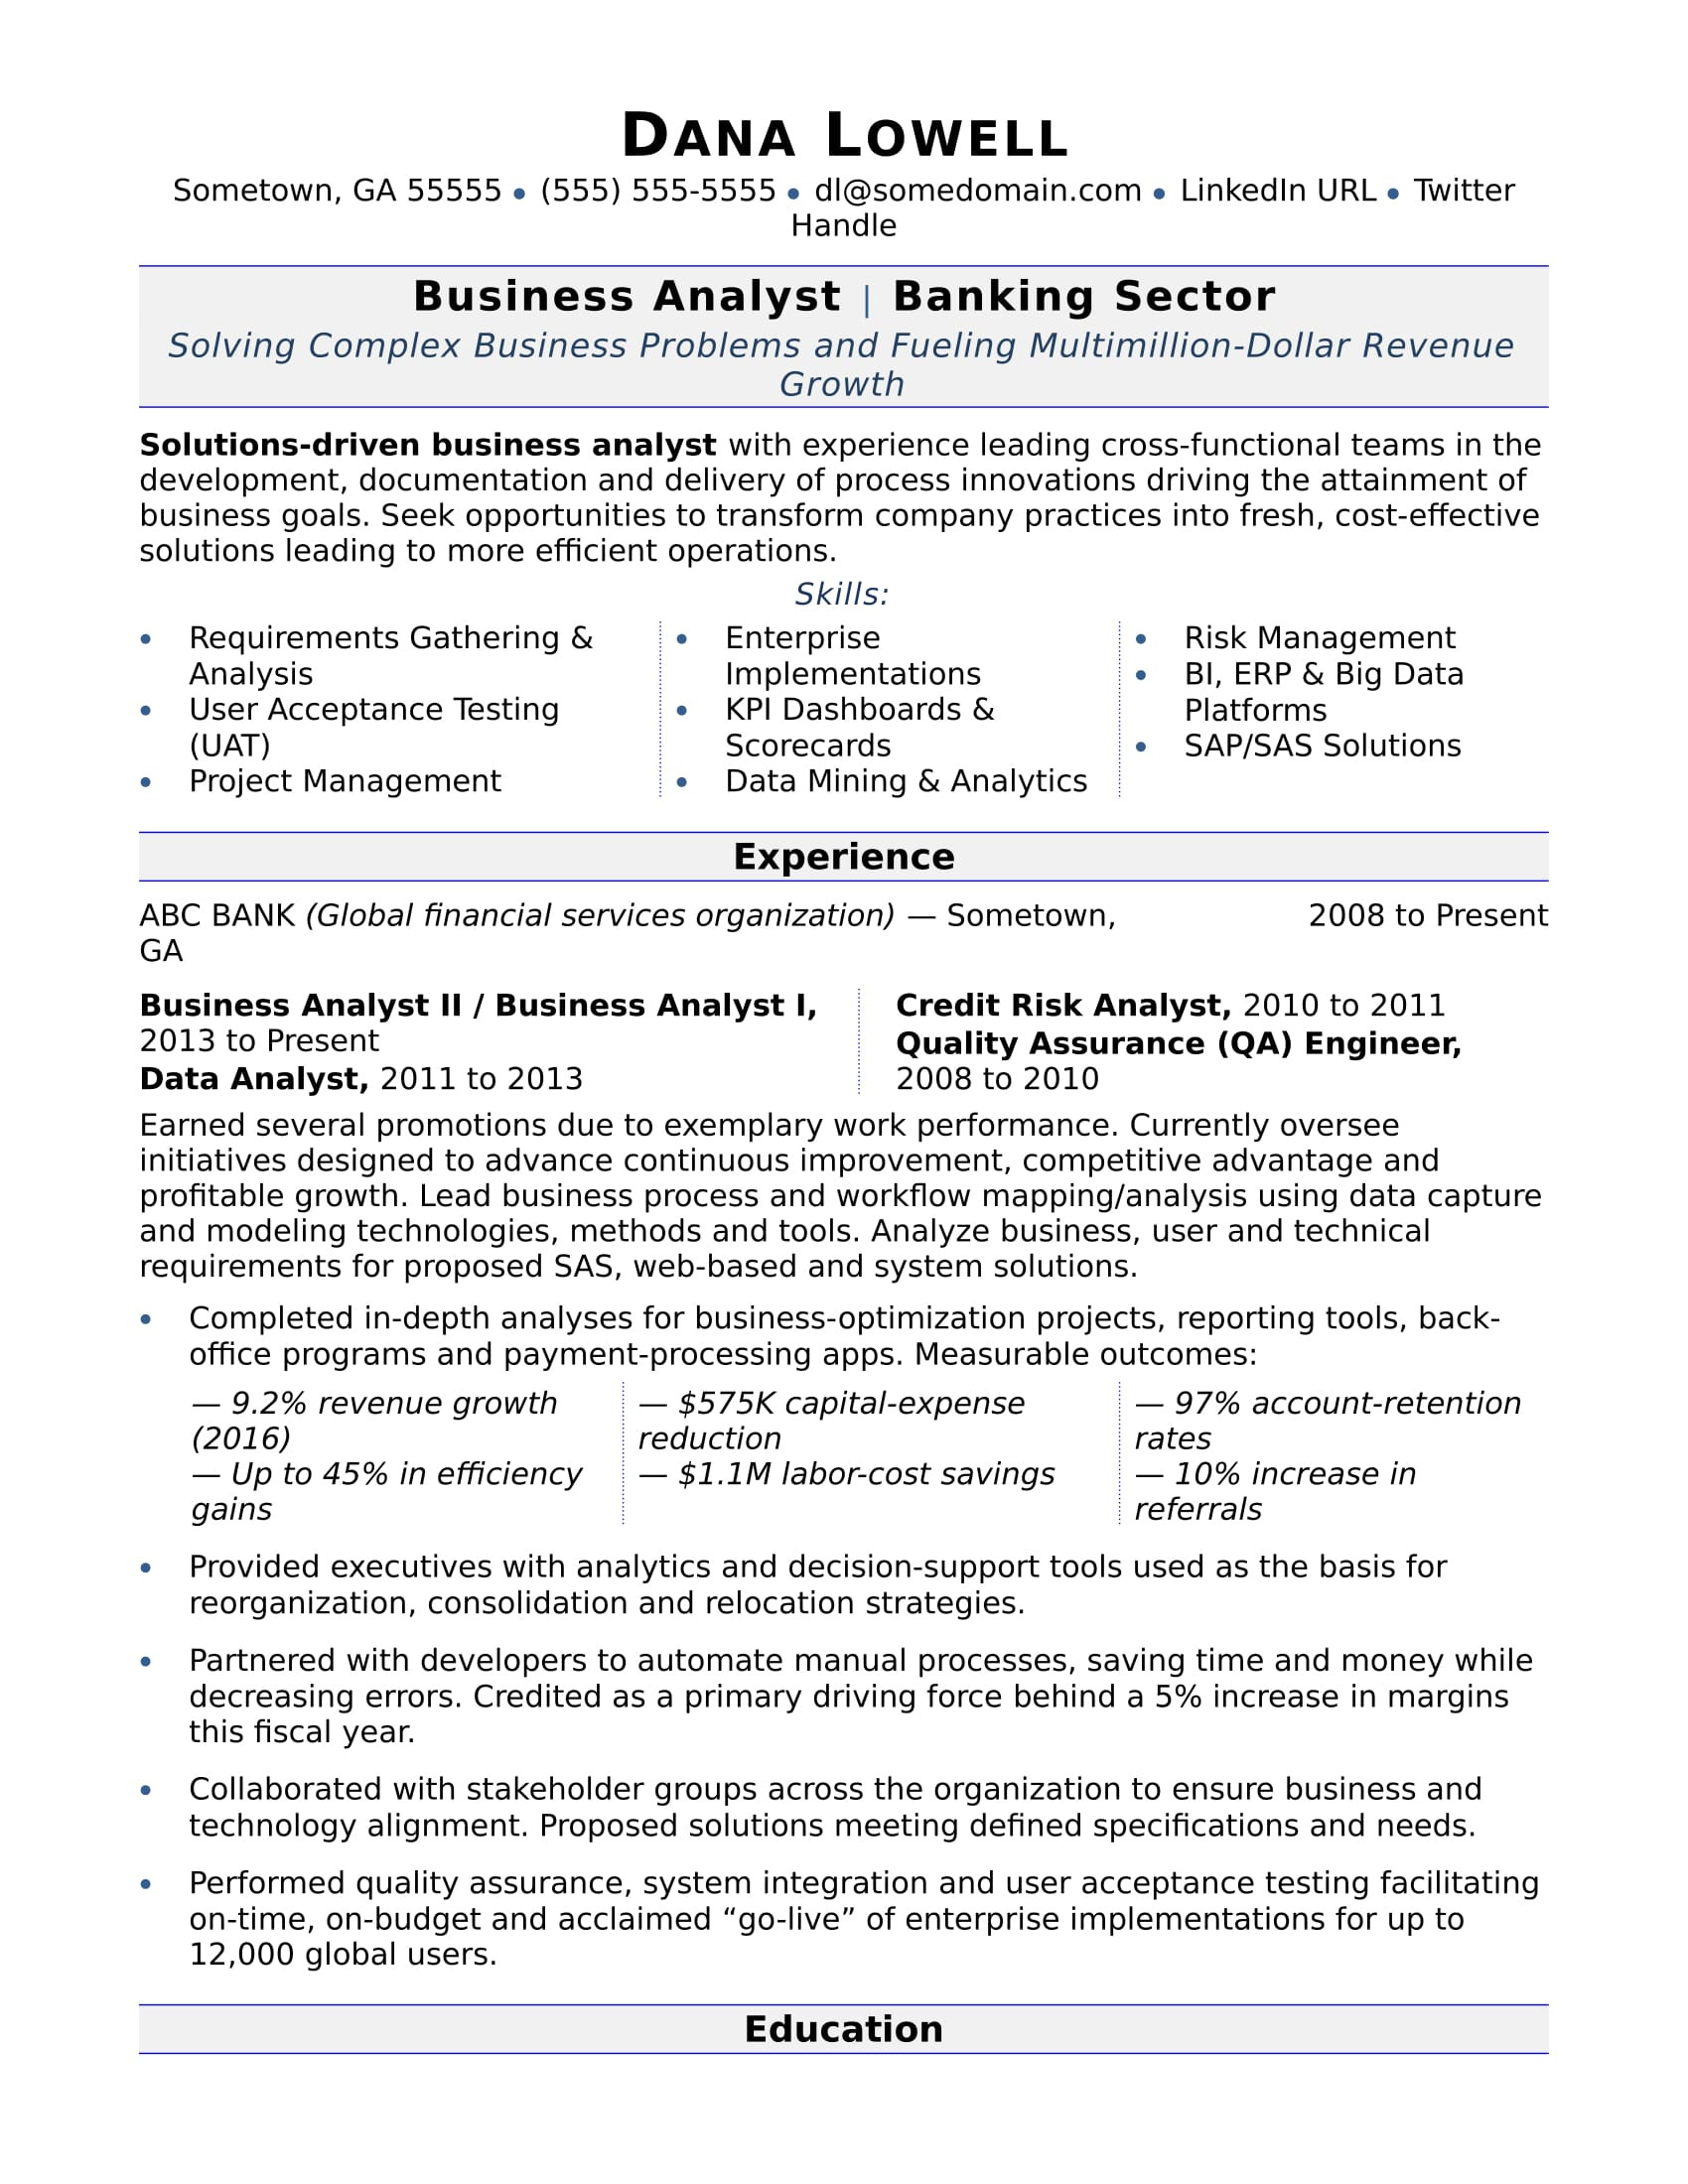 Business Analyst Sample Resume for Experienced Business Analyst Resume Monster.com